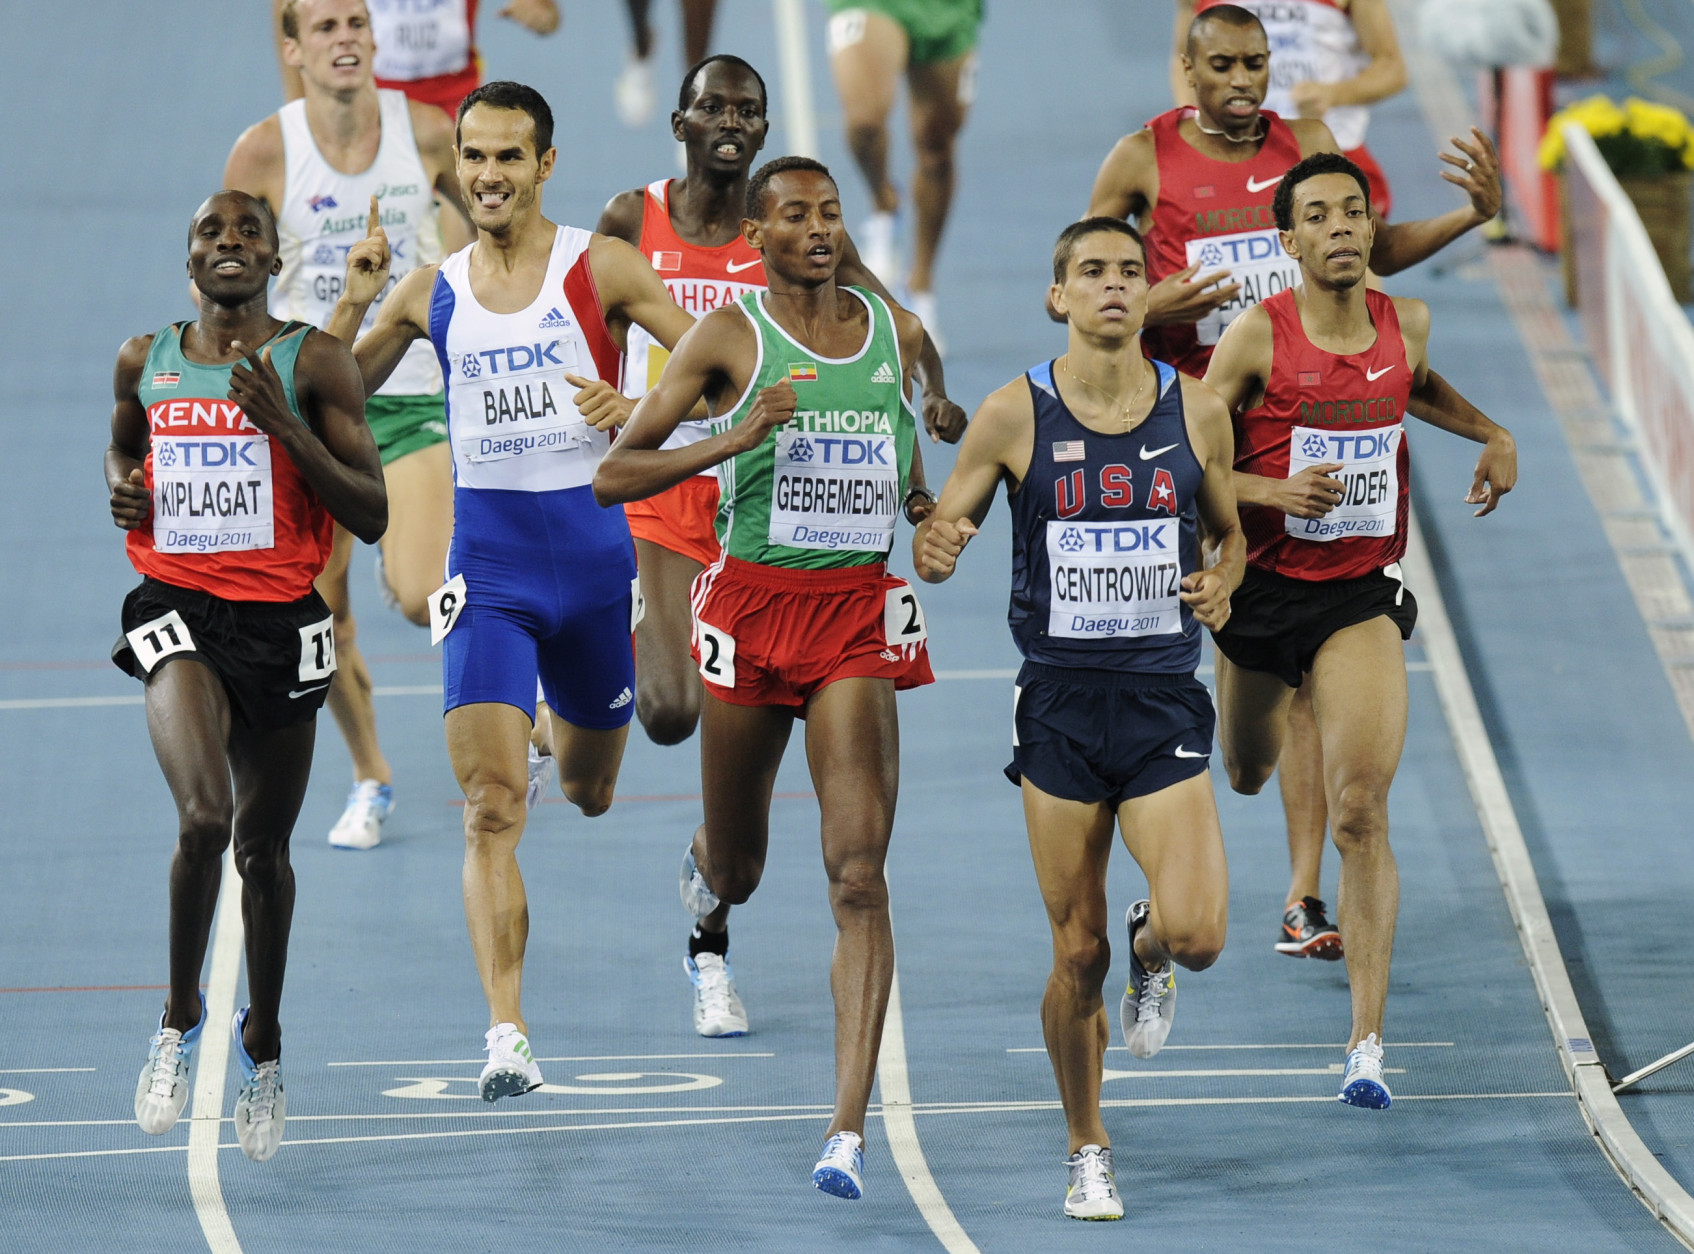 USA's Matthew Centrowitz, second from right, crosses the finish line ahead of Ethiopia's Mekonnen Gebremedhin, third from right, Kenya's Silas Kiplagat, left, France's Mehdi Baala, second from left and Morocco's Abdalaati Iguider to win a Men's 1500m semifinal at the World Athletics Championships in Daegu, South Korea, Thursday, Sept. 1, 2011. (AP Photo/Martin Meissner)